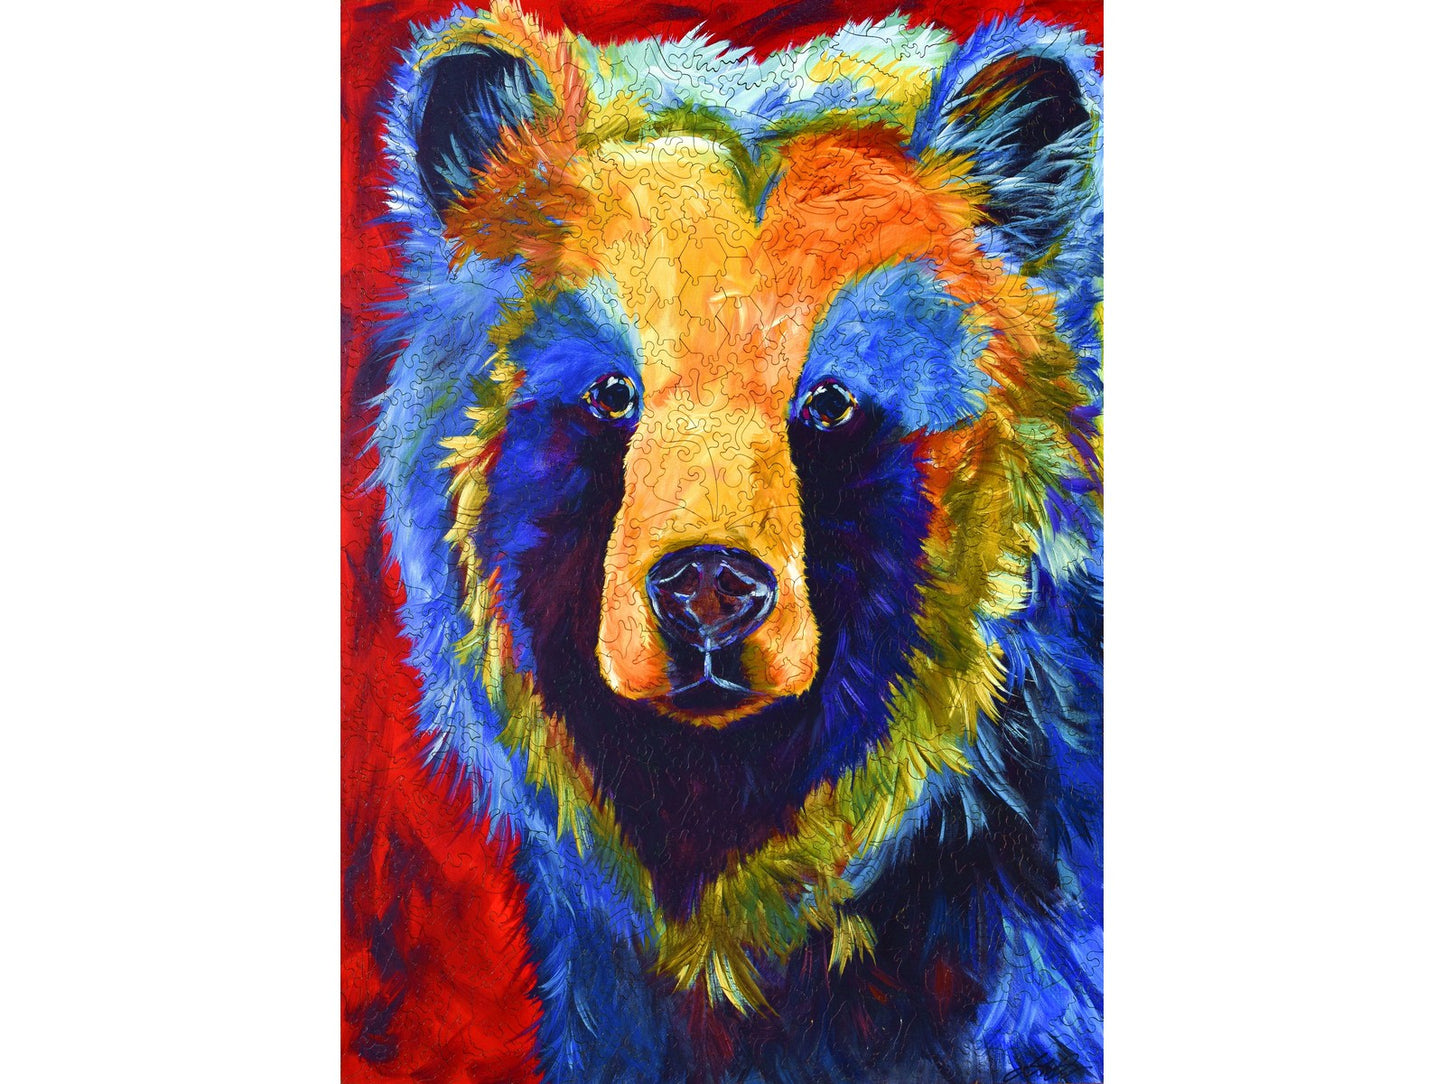 The front of the puzzle, The Heart of a Bear, which shows a brightly colored portrait of a bear.